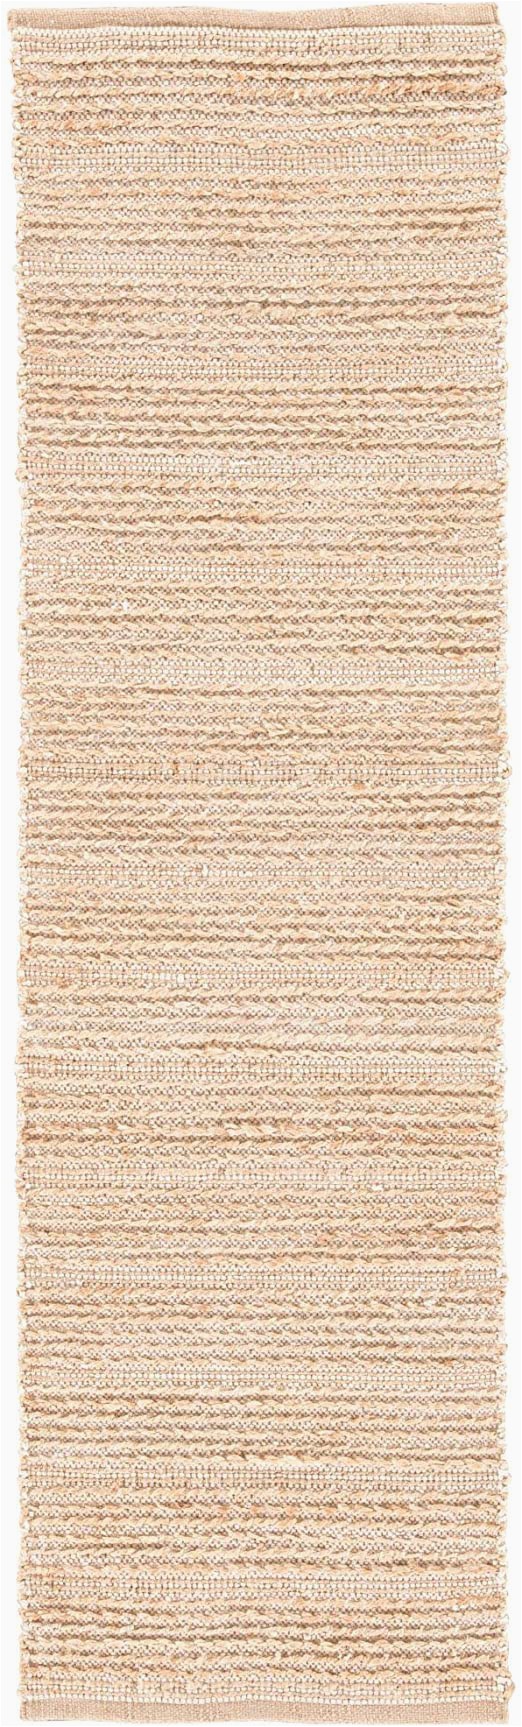 Diva at Home area Rugs Amazon Diva at Home 2 5 X 9 Sandy Tan and White